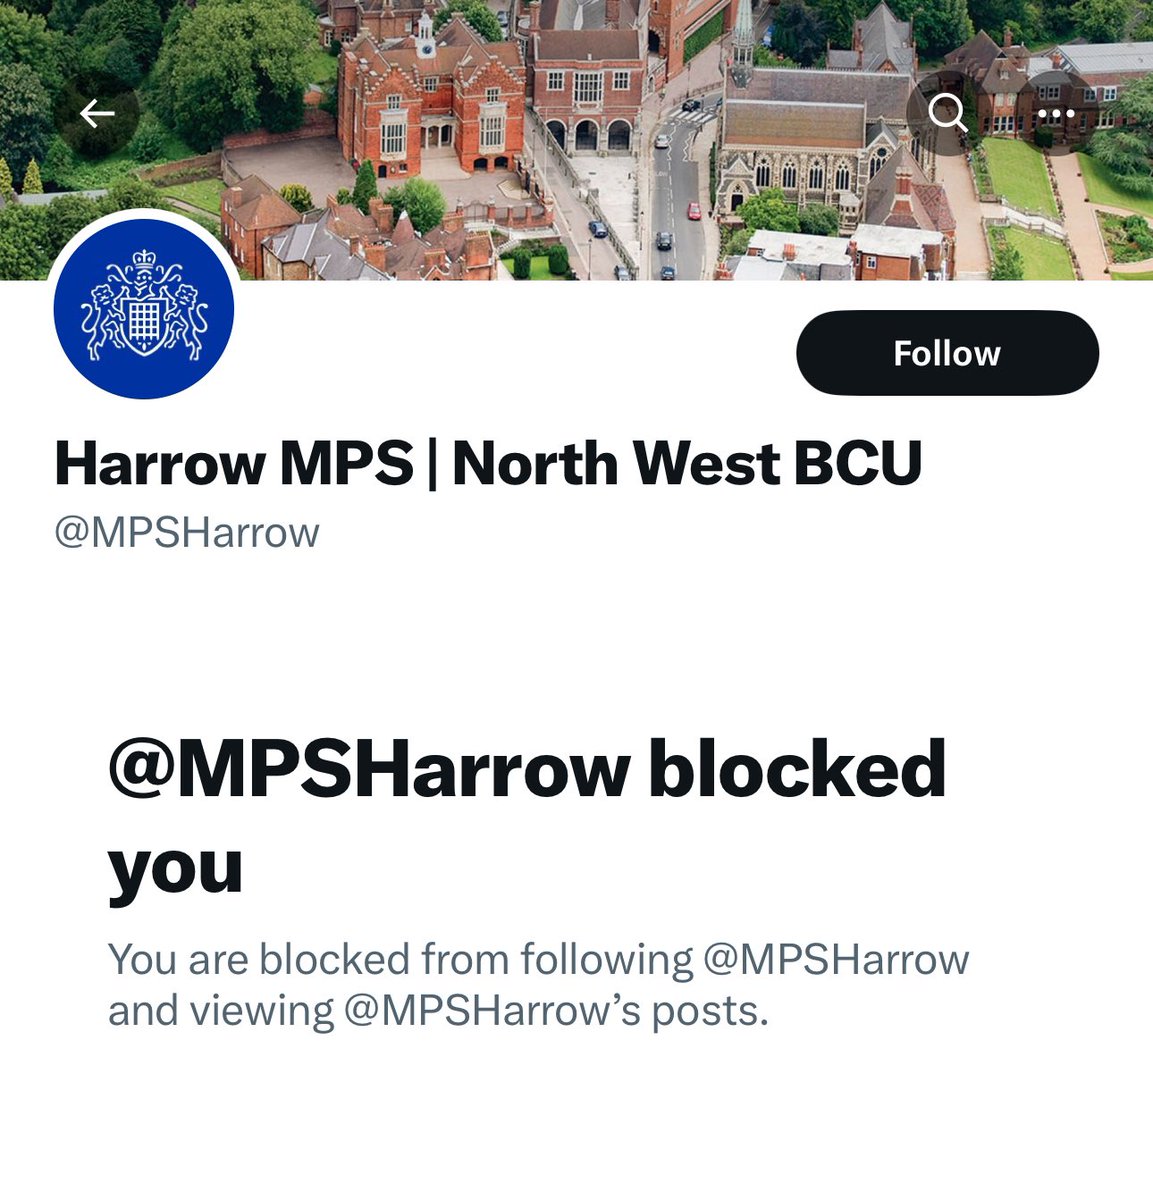 Wtf? The Met Police in Harrow have blocked me??

Why?? Is it because I’m Jewish and I am trying to fight antisemitism in this country?

Is this actually happening? Wow.

I have never commented on anything that account has posted, didn’t even know it existed.